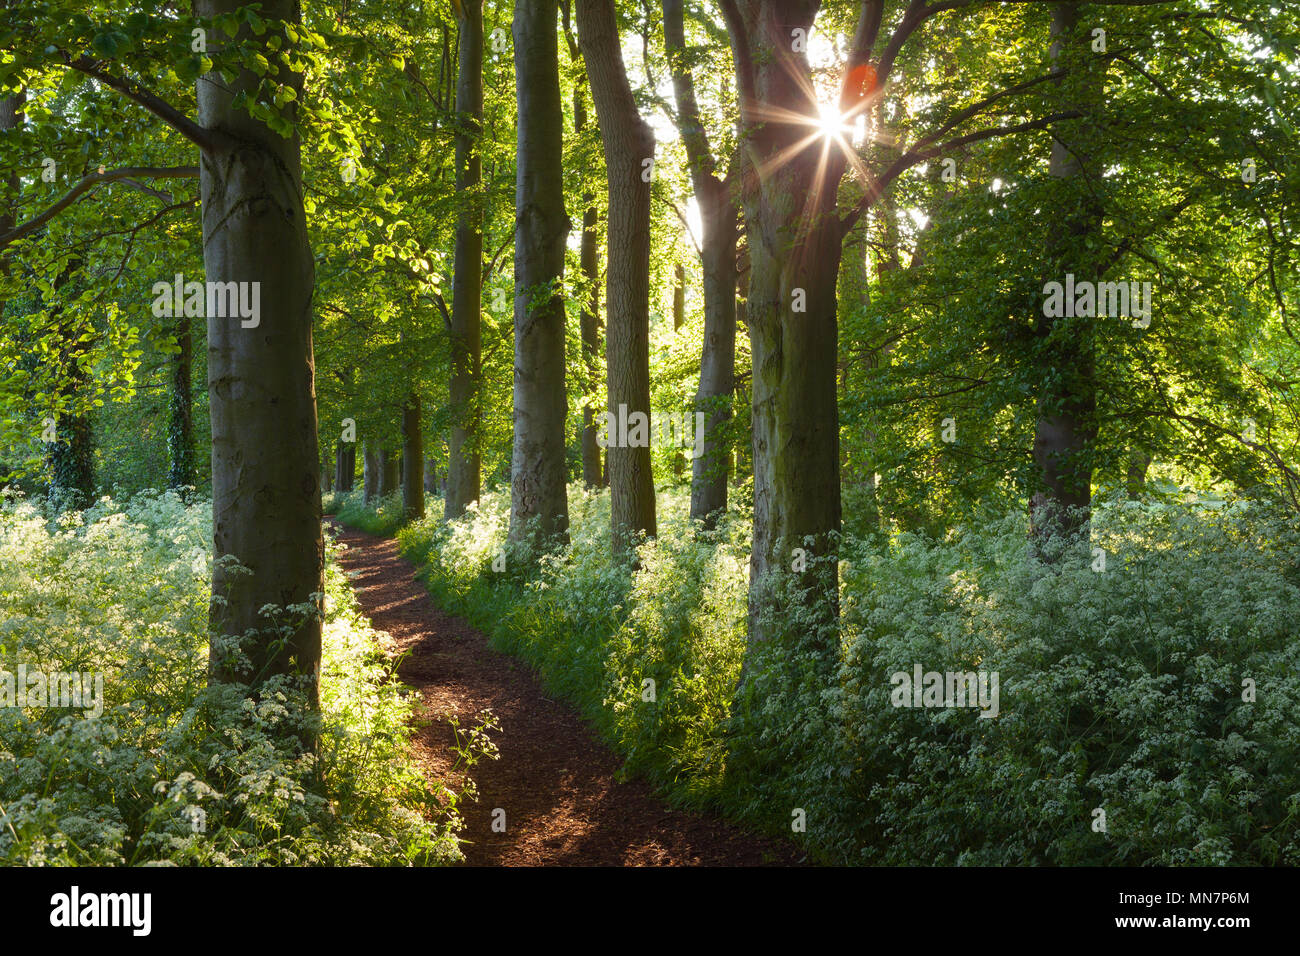 Barton-upon-Humber, North Lincolnshire, UK. 14th May, 2018. UK Weather: Late evening light on Cow Parsley and Beech Trees in Baysgarth Park in Spring. Barton-upon-Humber, North Lincolnshire, UK. 14th May 2018. Credit: LEE BEEL/Alamy Live News Stock Photo